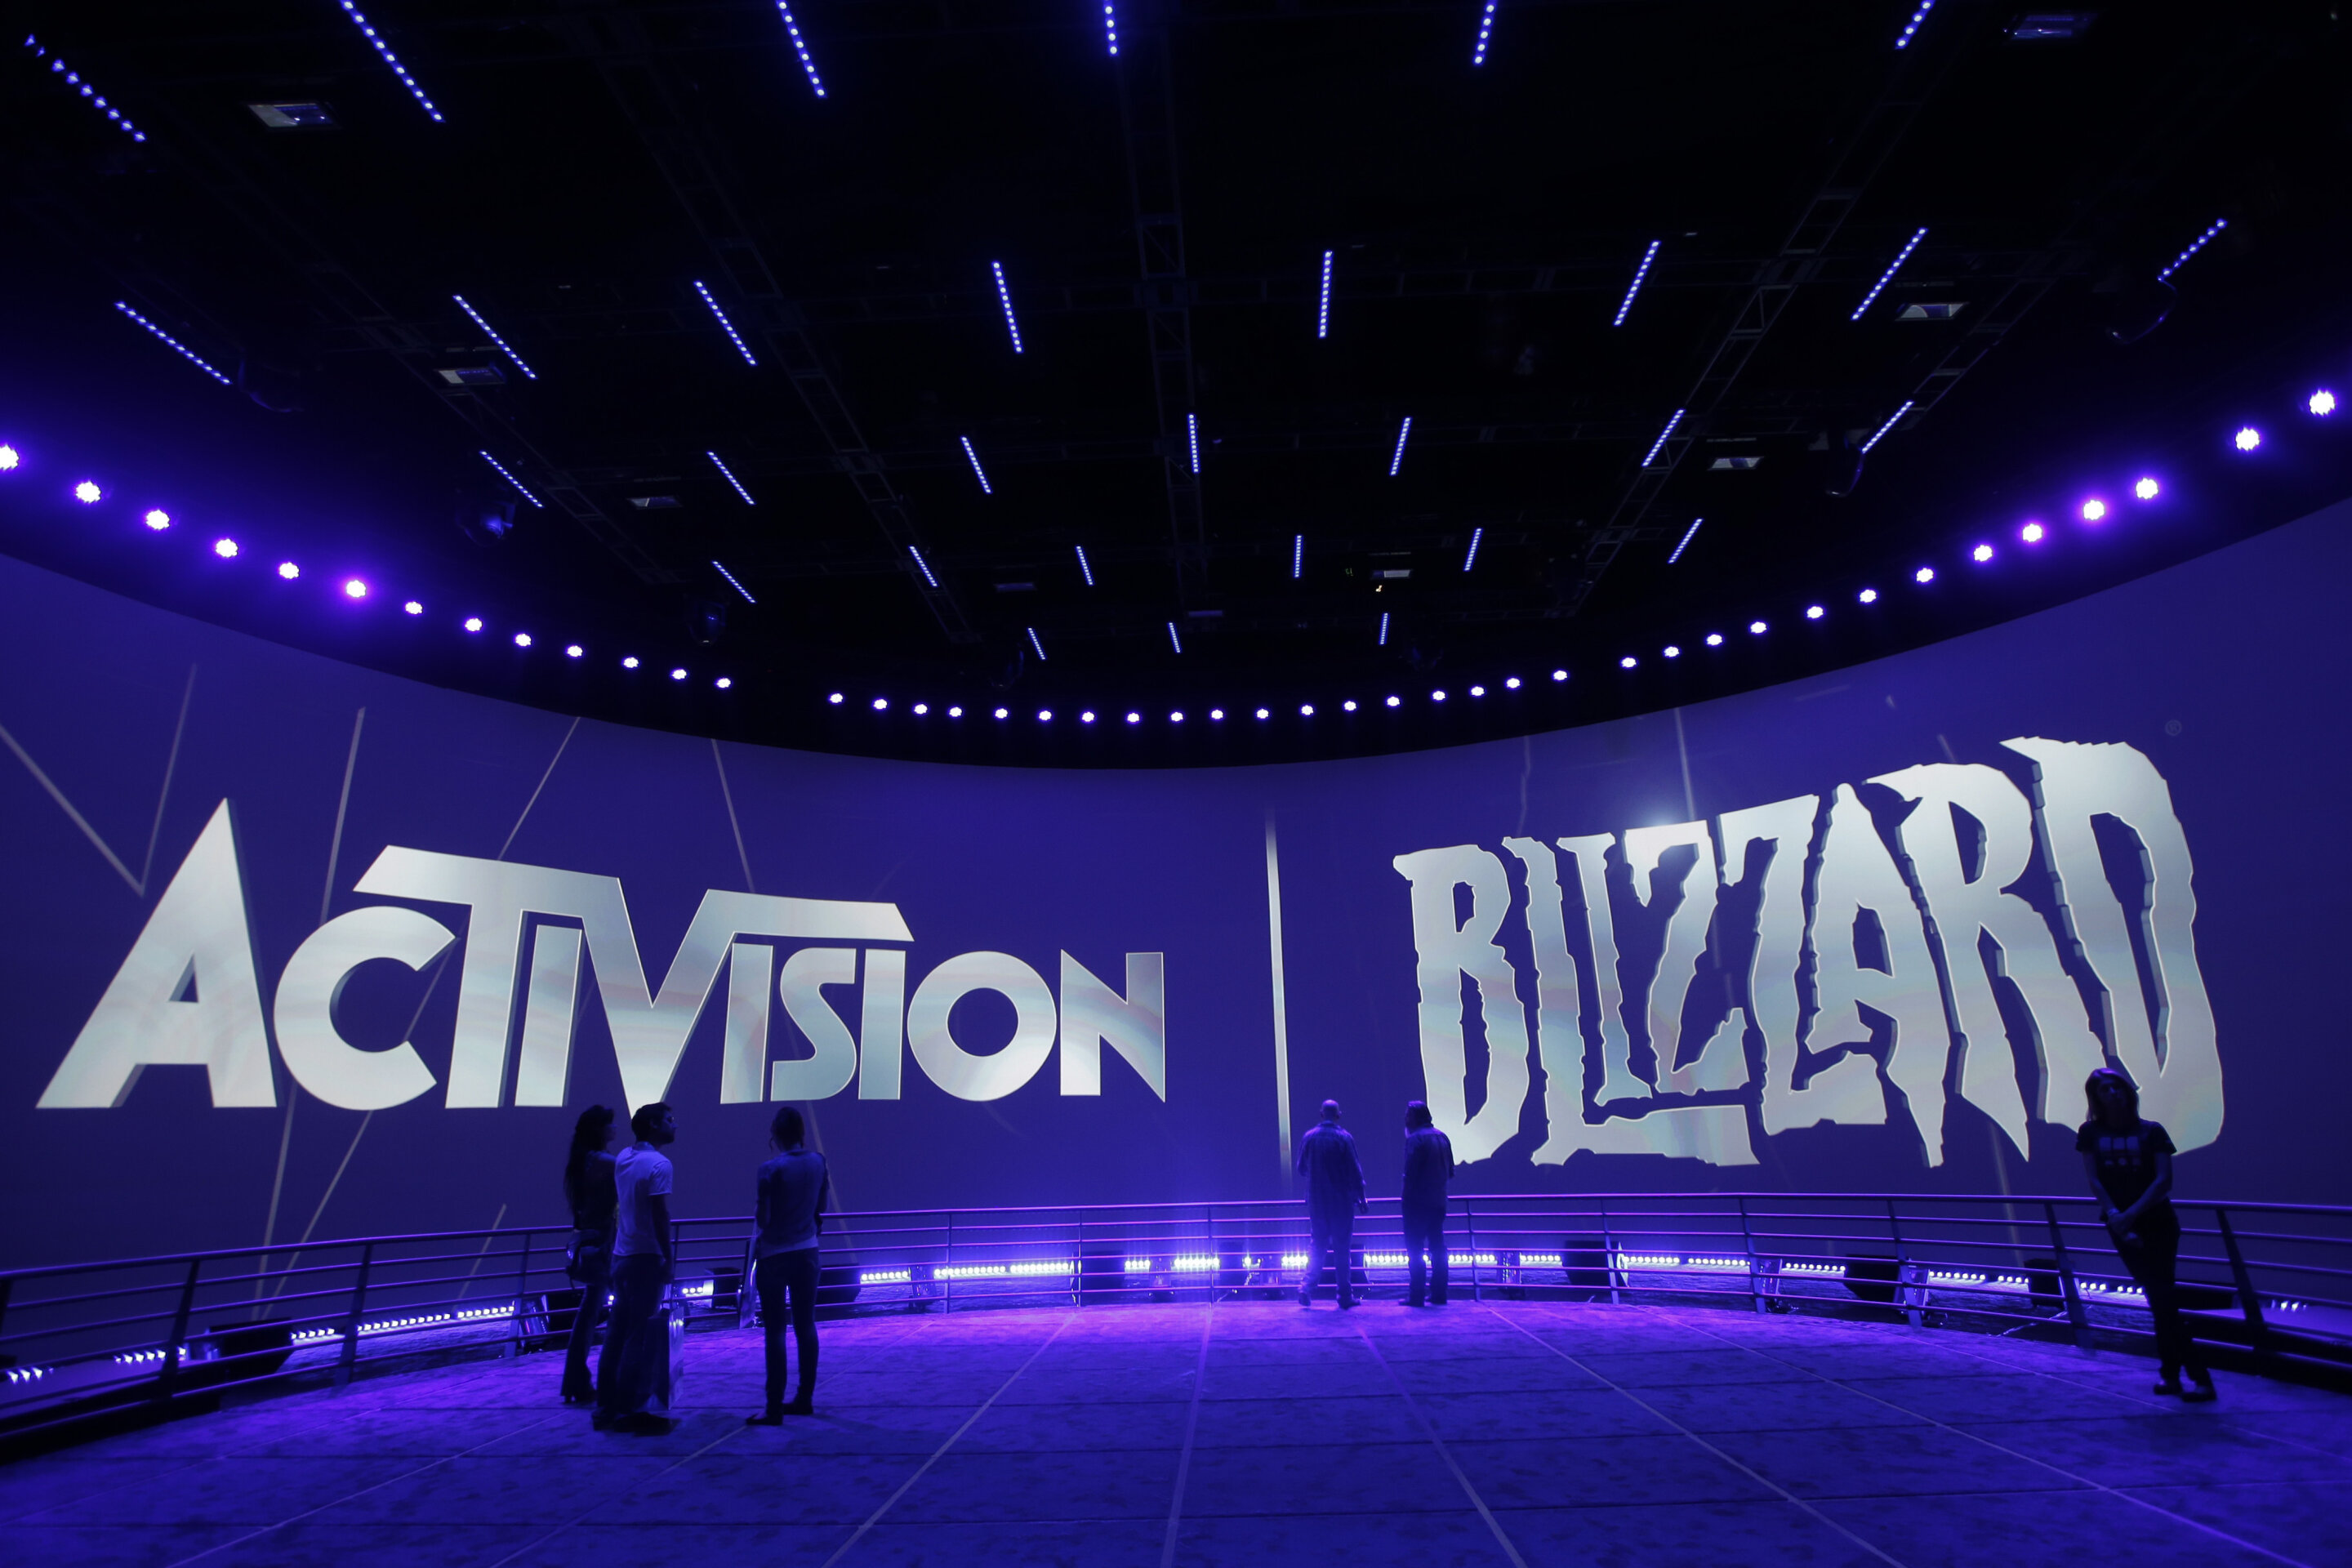 Microsoft’s Activision Blizzard deal gets global scrutiny